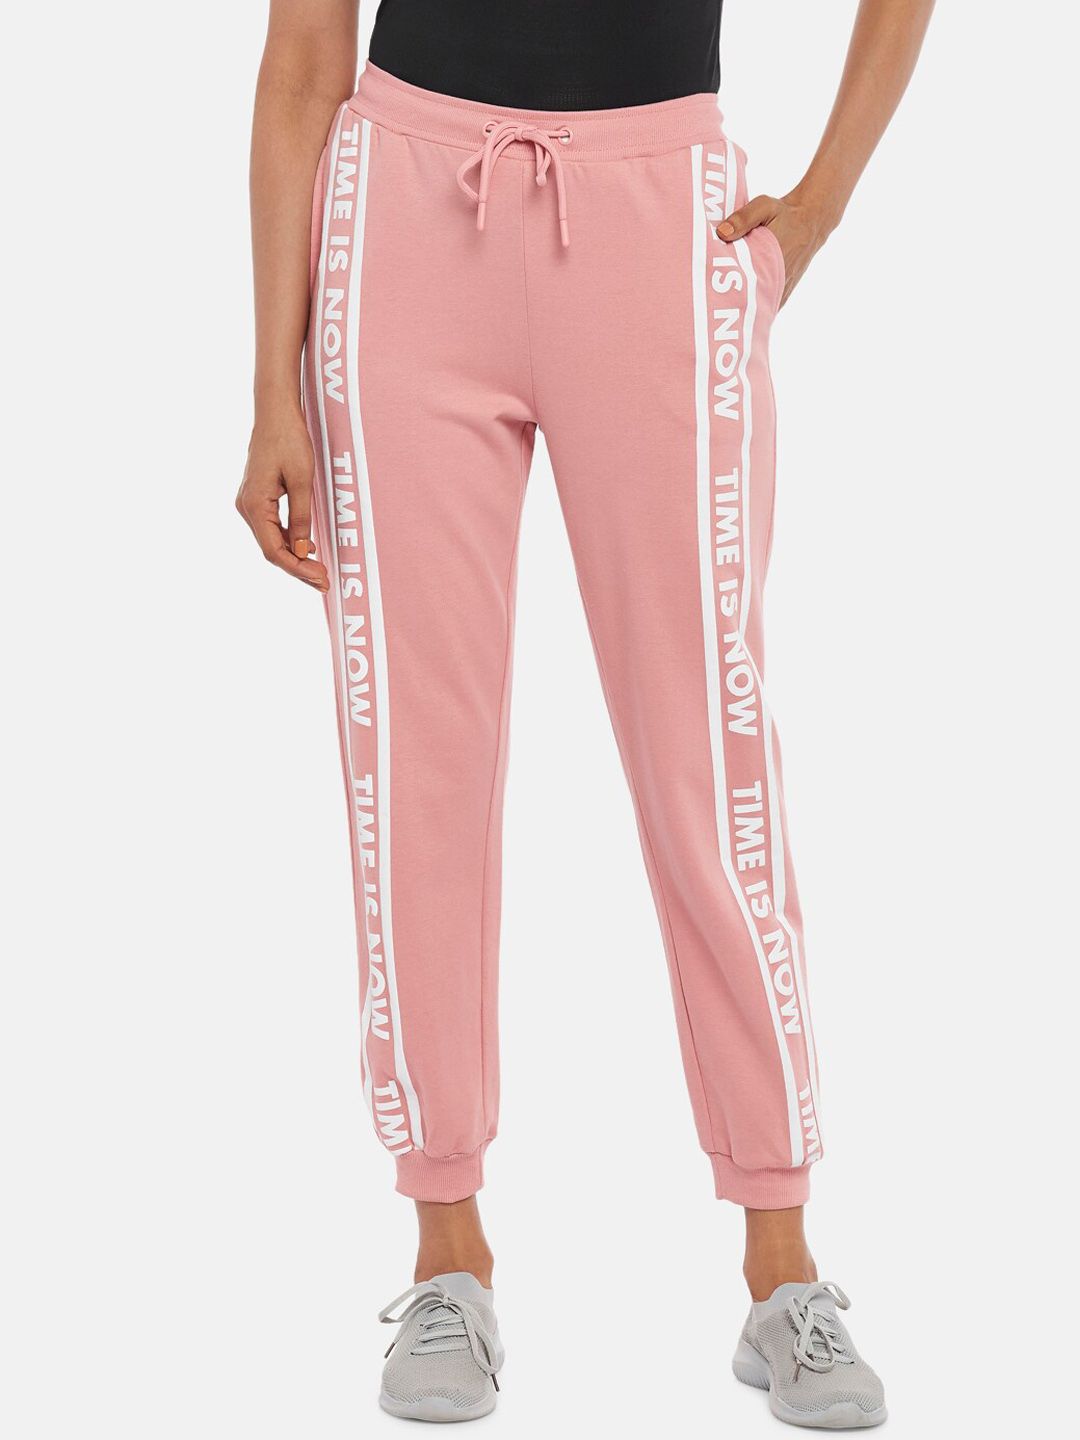 Ajile by Pantaloons Women Pink & White Typography Printed Joggers Price in India